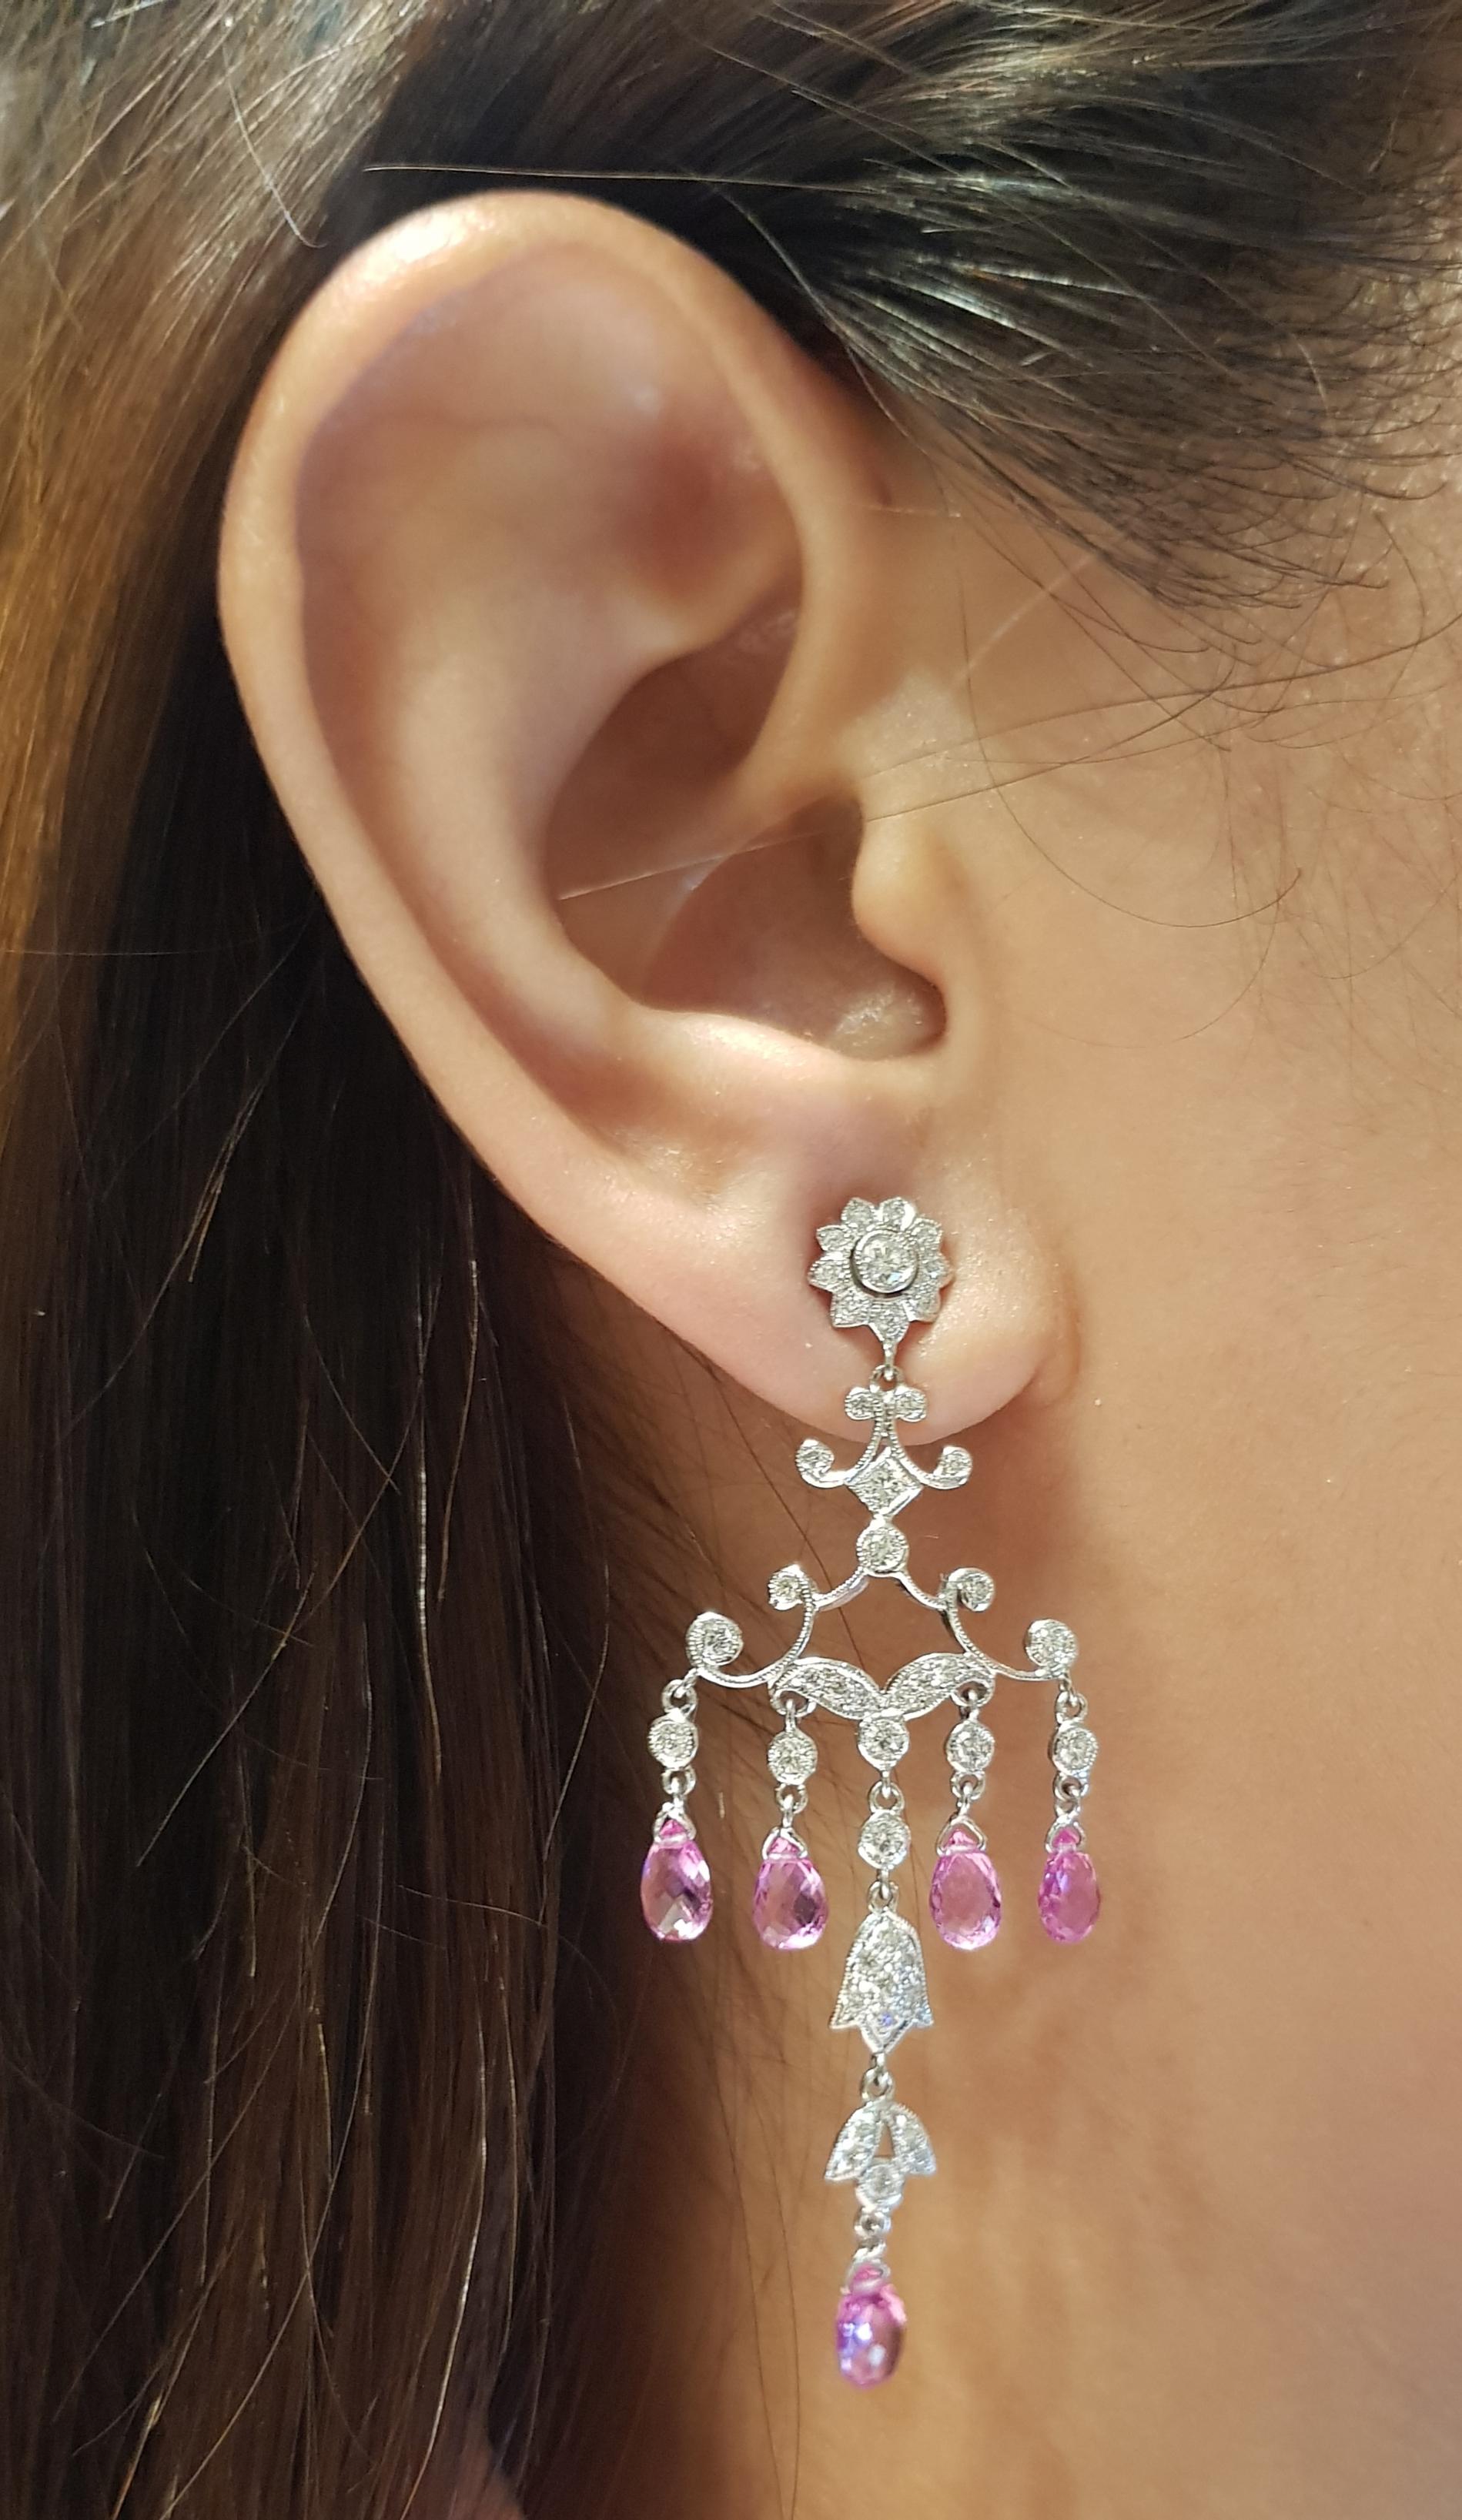 Pink Sapphire 5.56 carats with Diamond 1.0 carats Earrings set in 18 Karat White Gold Settings

Width:  2.1 cm 
Length: 6.0 cm
Total Weight: 8.62 grams

